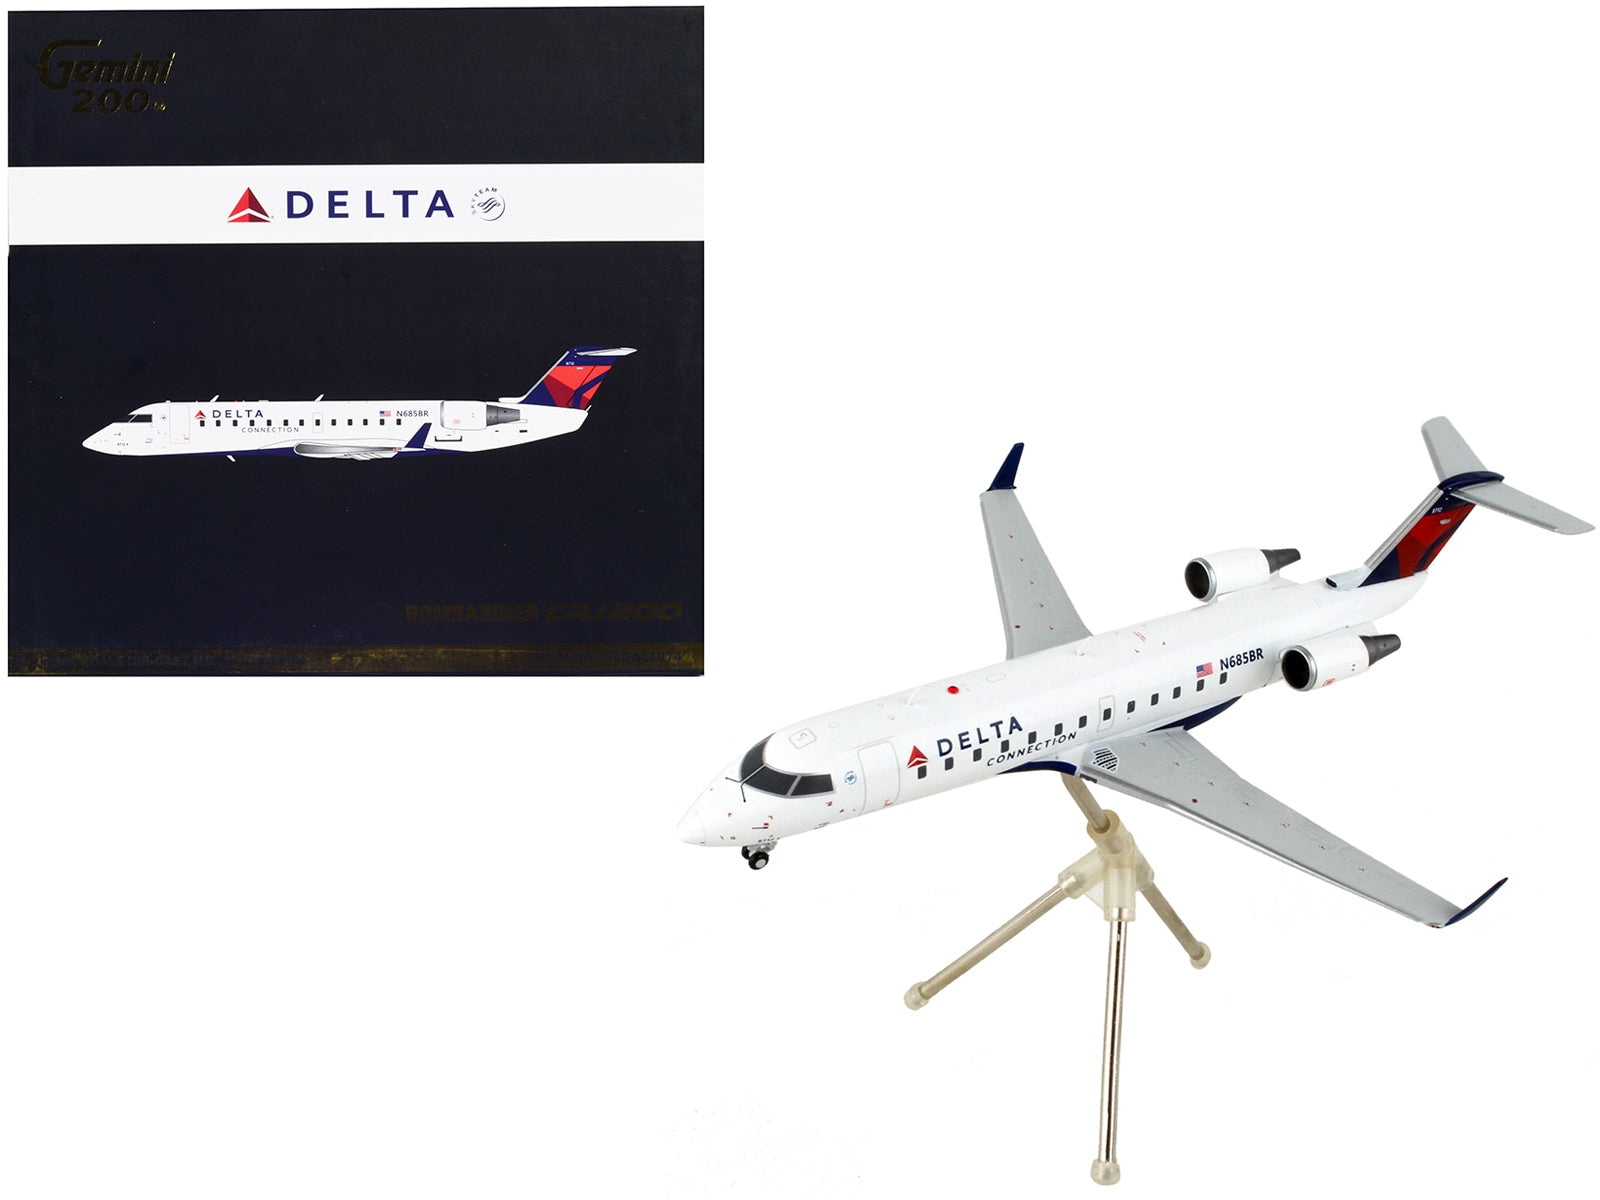 ombardier CRJ200 Commercial Aircraft "Delta Air Lines - Delta Connection" White with Blue and Red Tail